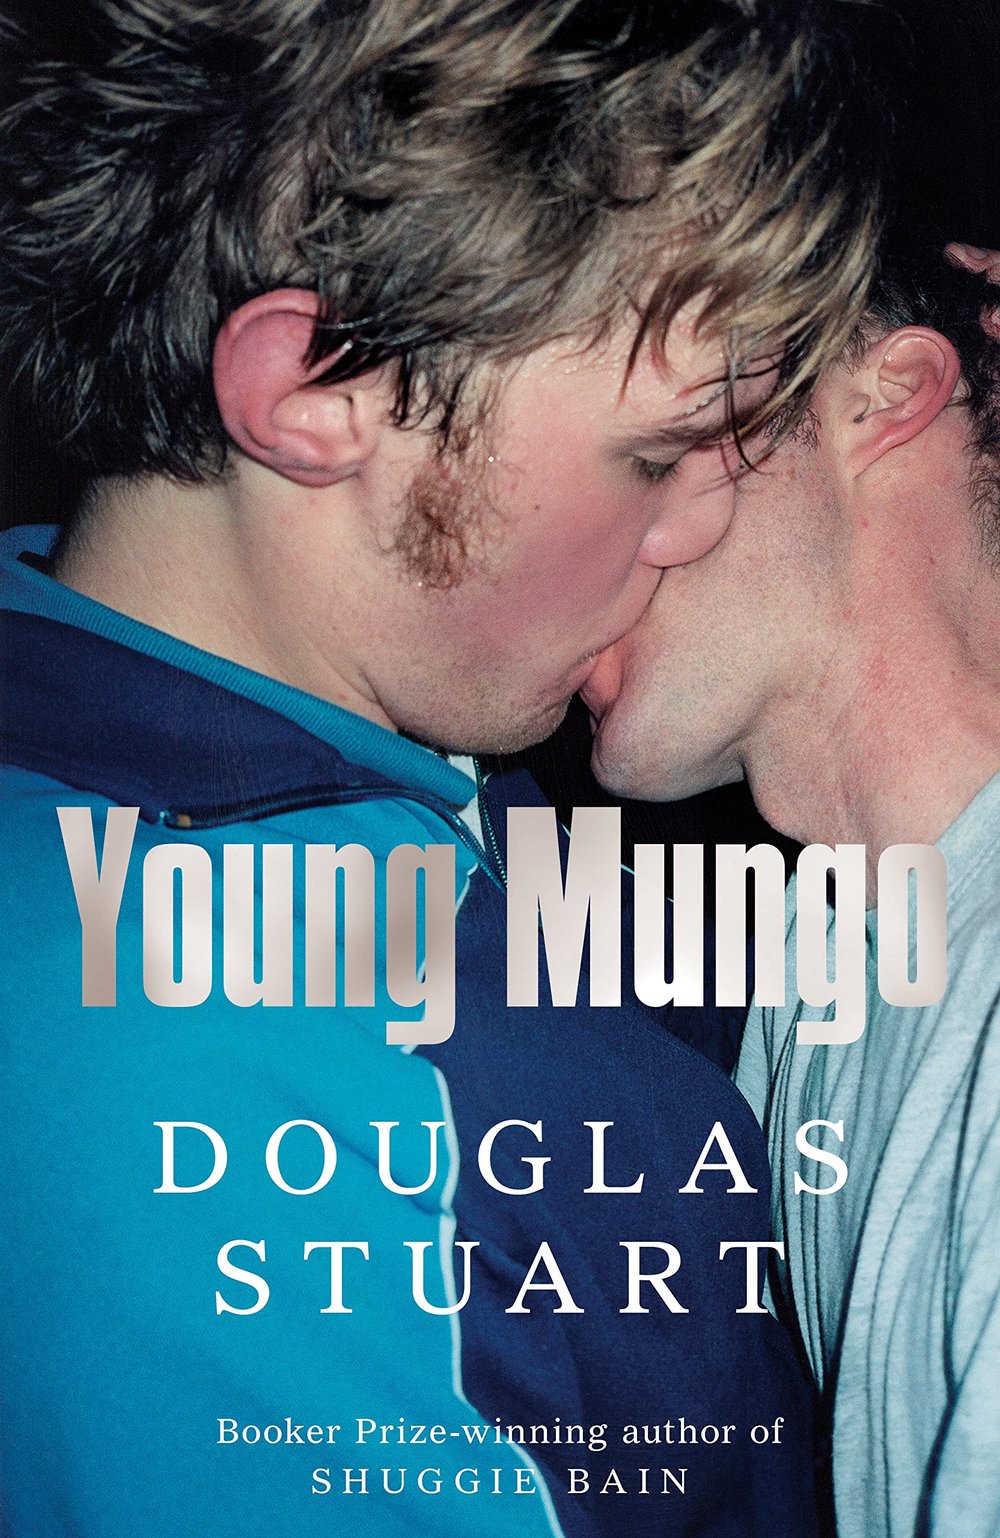 Young Mungo by Douglas Stuart — Lonesome Reader